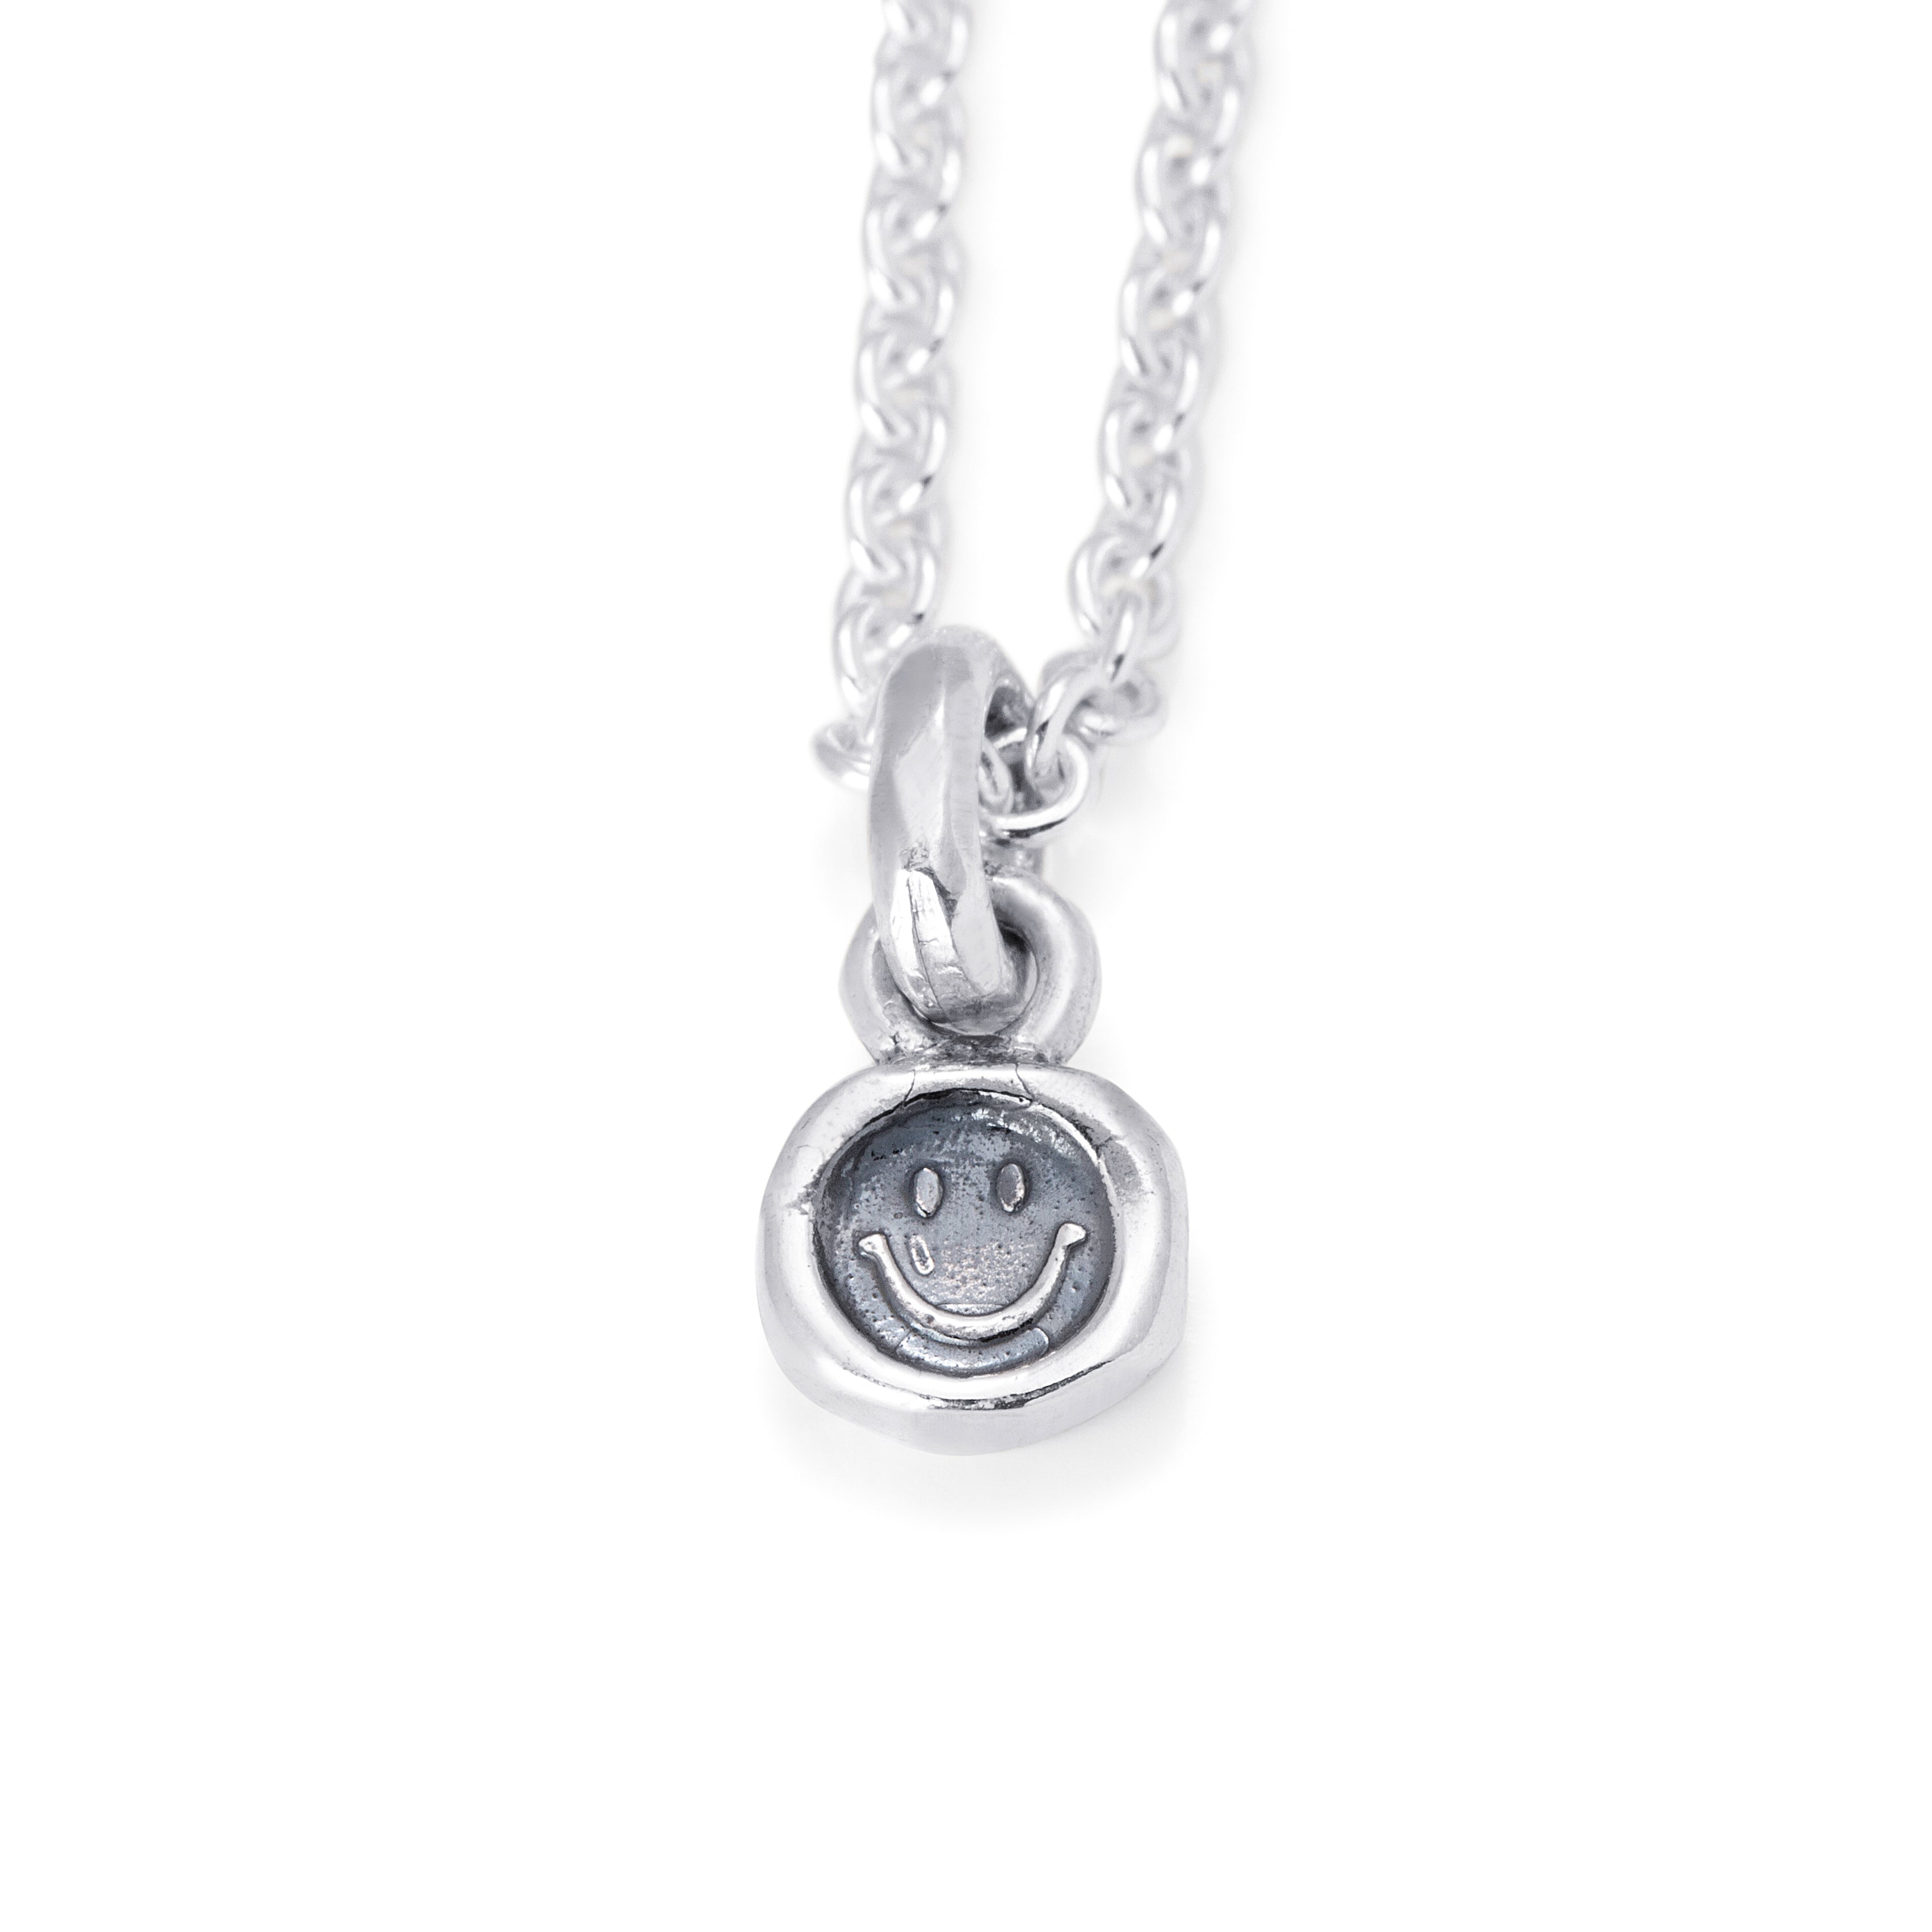 Solid Sterling Silver tablet style pendant stamped with a smiling face design.